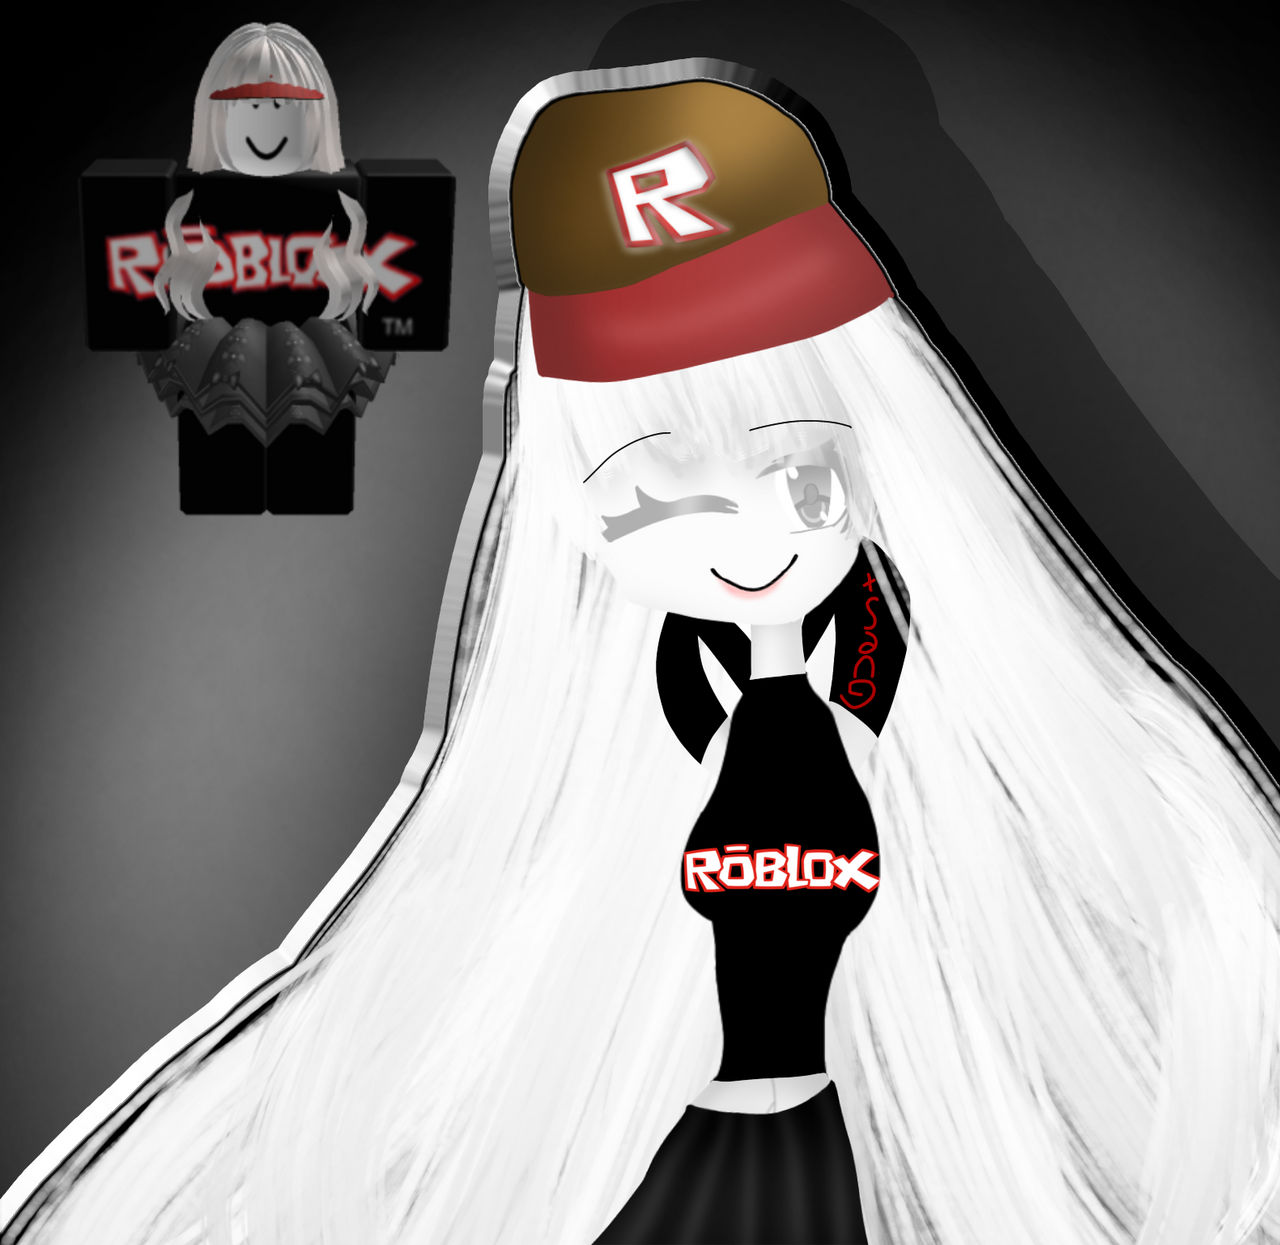 The Guests of Roblox by Qiikz on DeviantArt